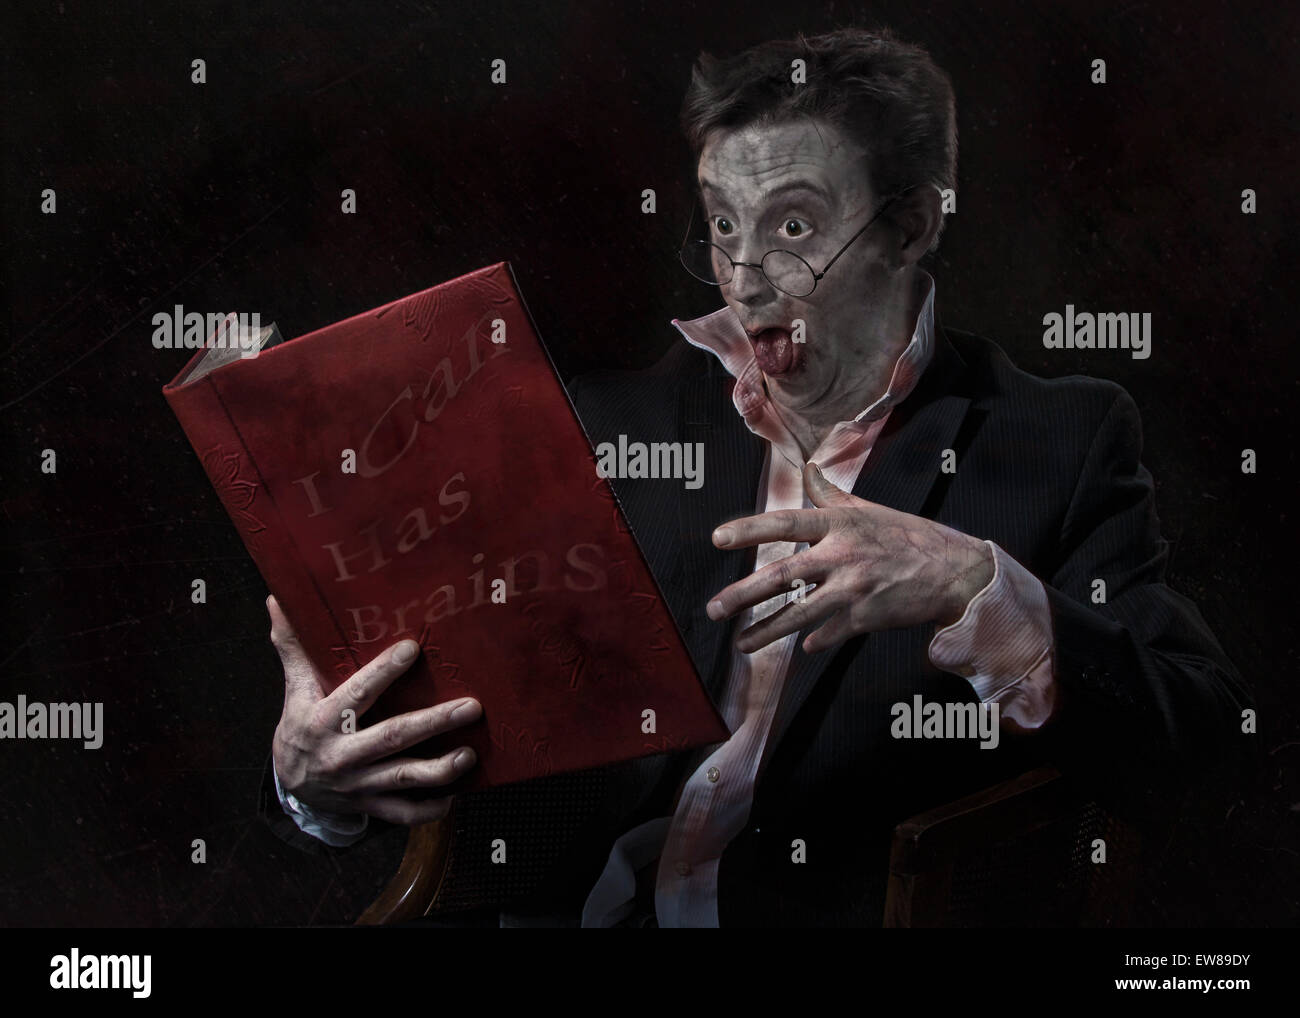 Male zombie sitting reading a book on a dark background. Stock Photo